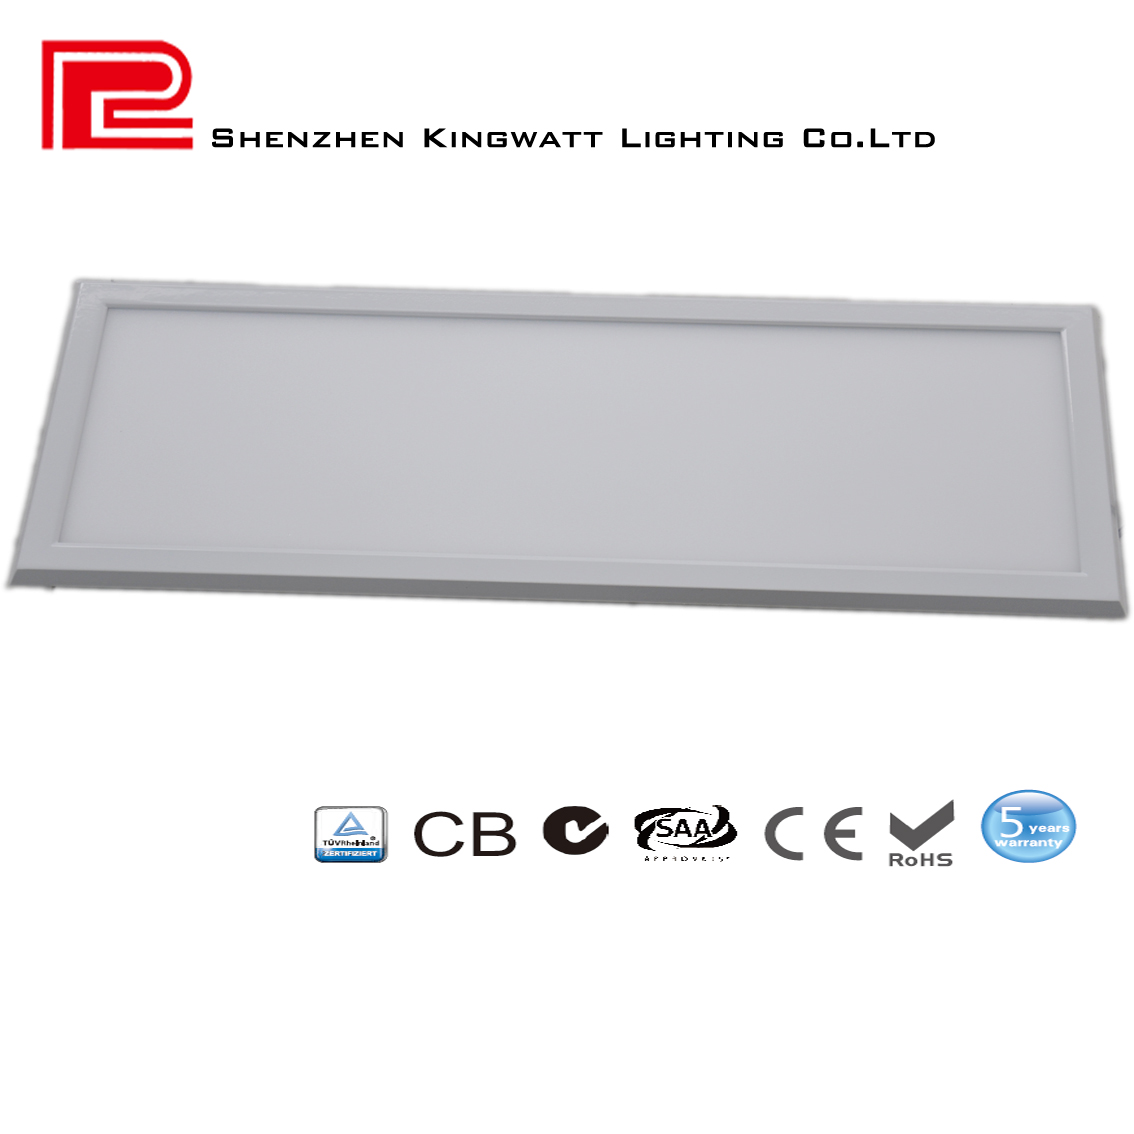 CB/CTEL/SAA/RoHS 100Lm/W LED Panel Light，300mm*300mm with 16W